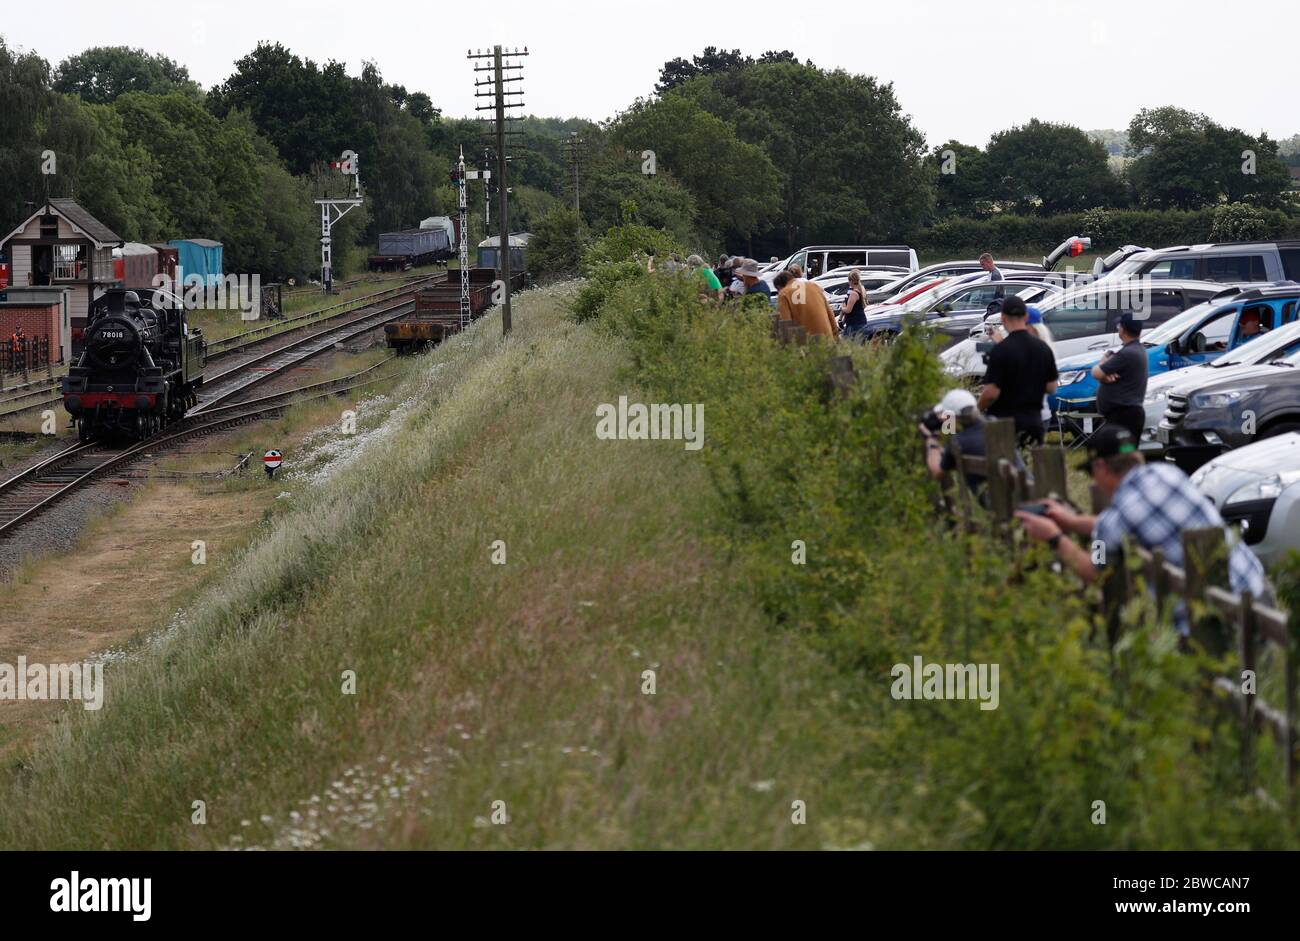 Loughborough, Leicestershire, UK. 31st May 2020. Members of the public watch as a Standard Class 2 locomotive steam train from the Great Central Railway is tested after coronavirus pandemic lockdown restrictions were eased. Credit Darren Staples/Alamy Live News. Stock Photo